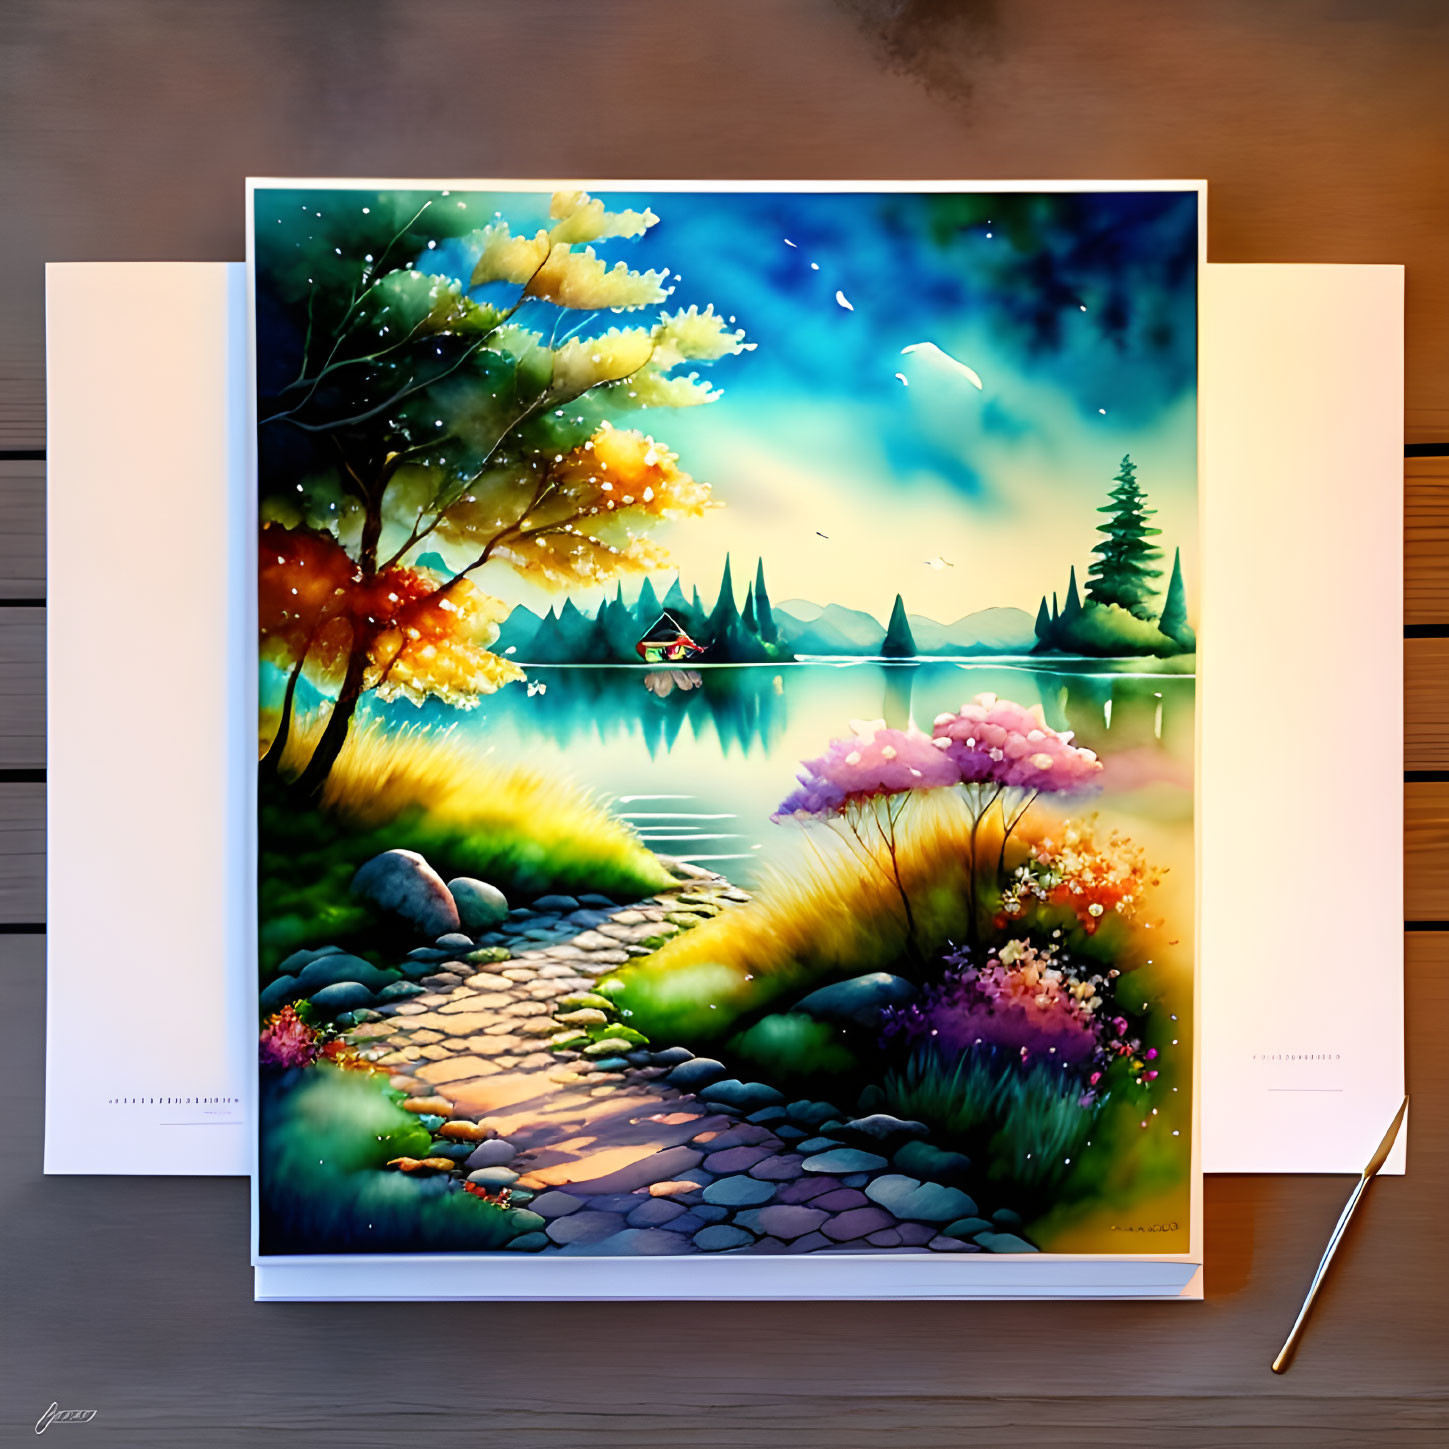 Scenic lakeside path painting at twilight with trees, flowers, lake, mountains, boat